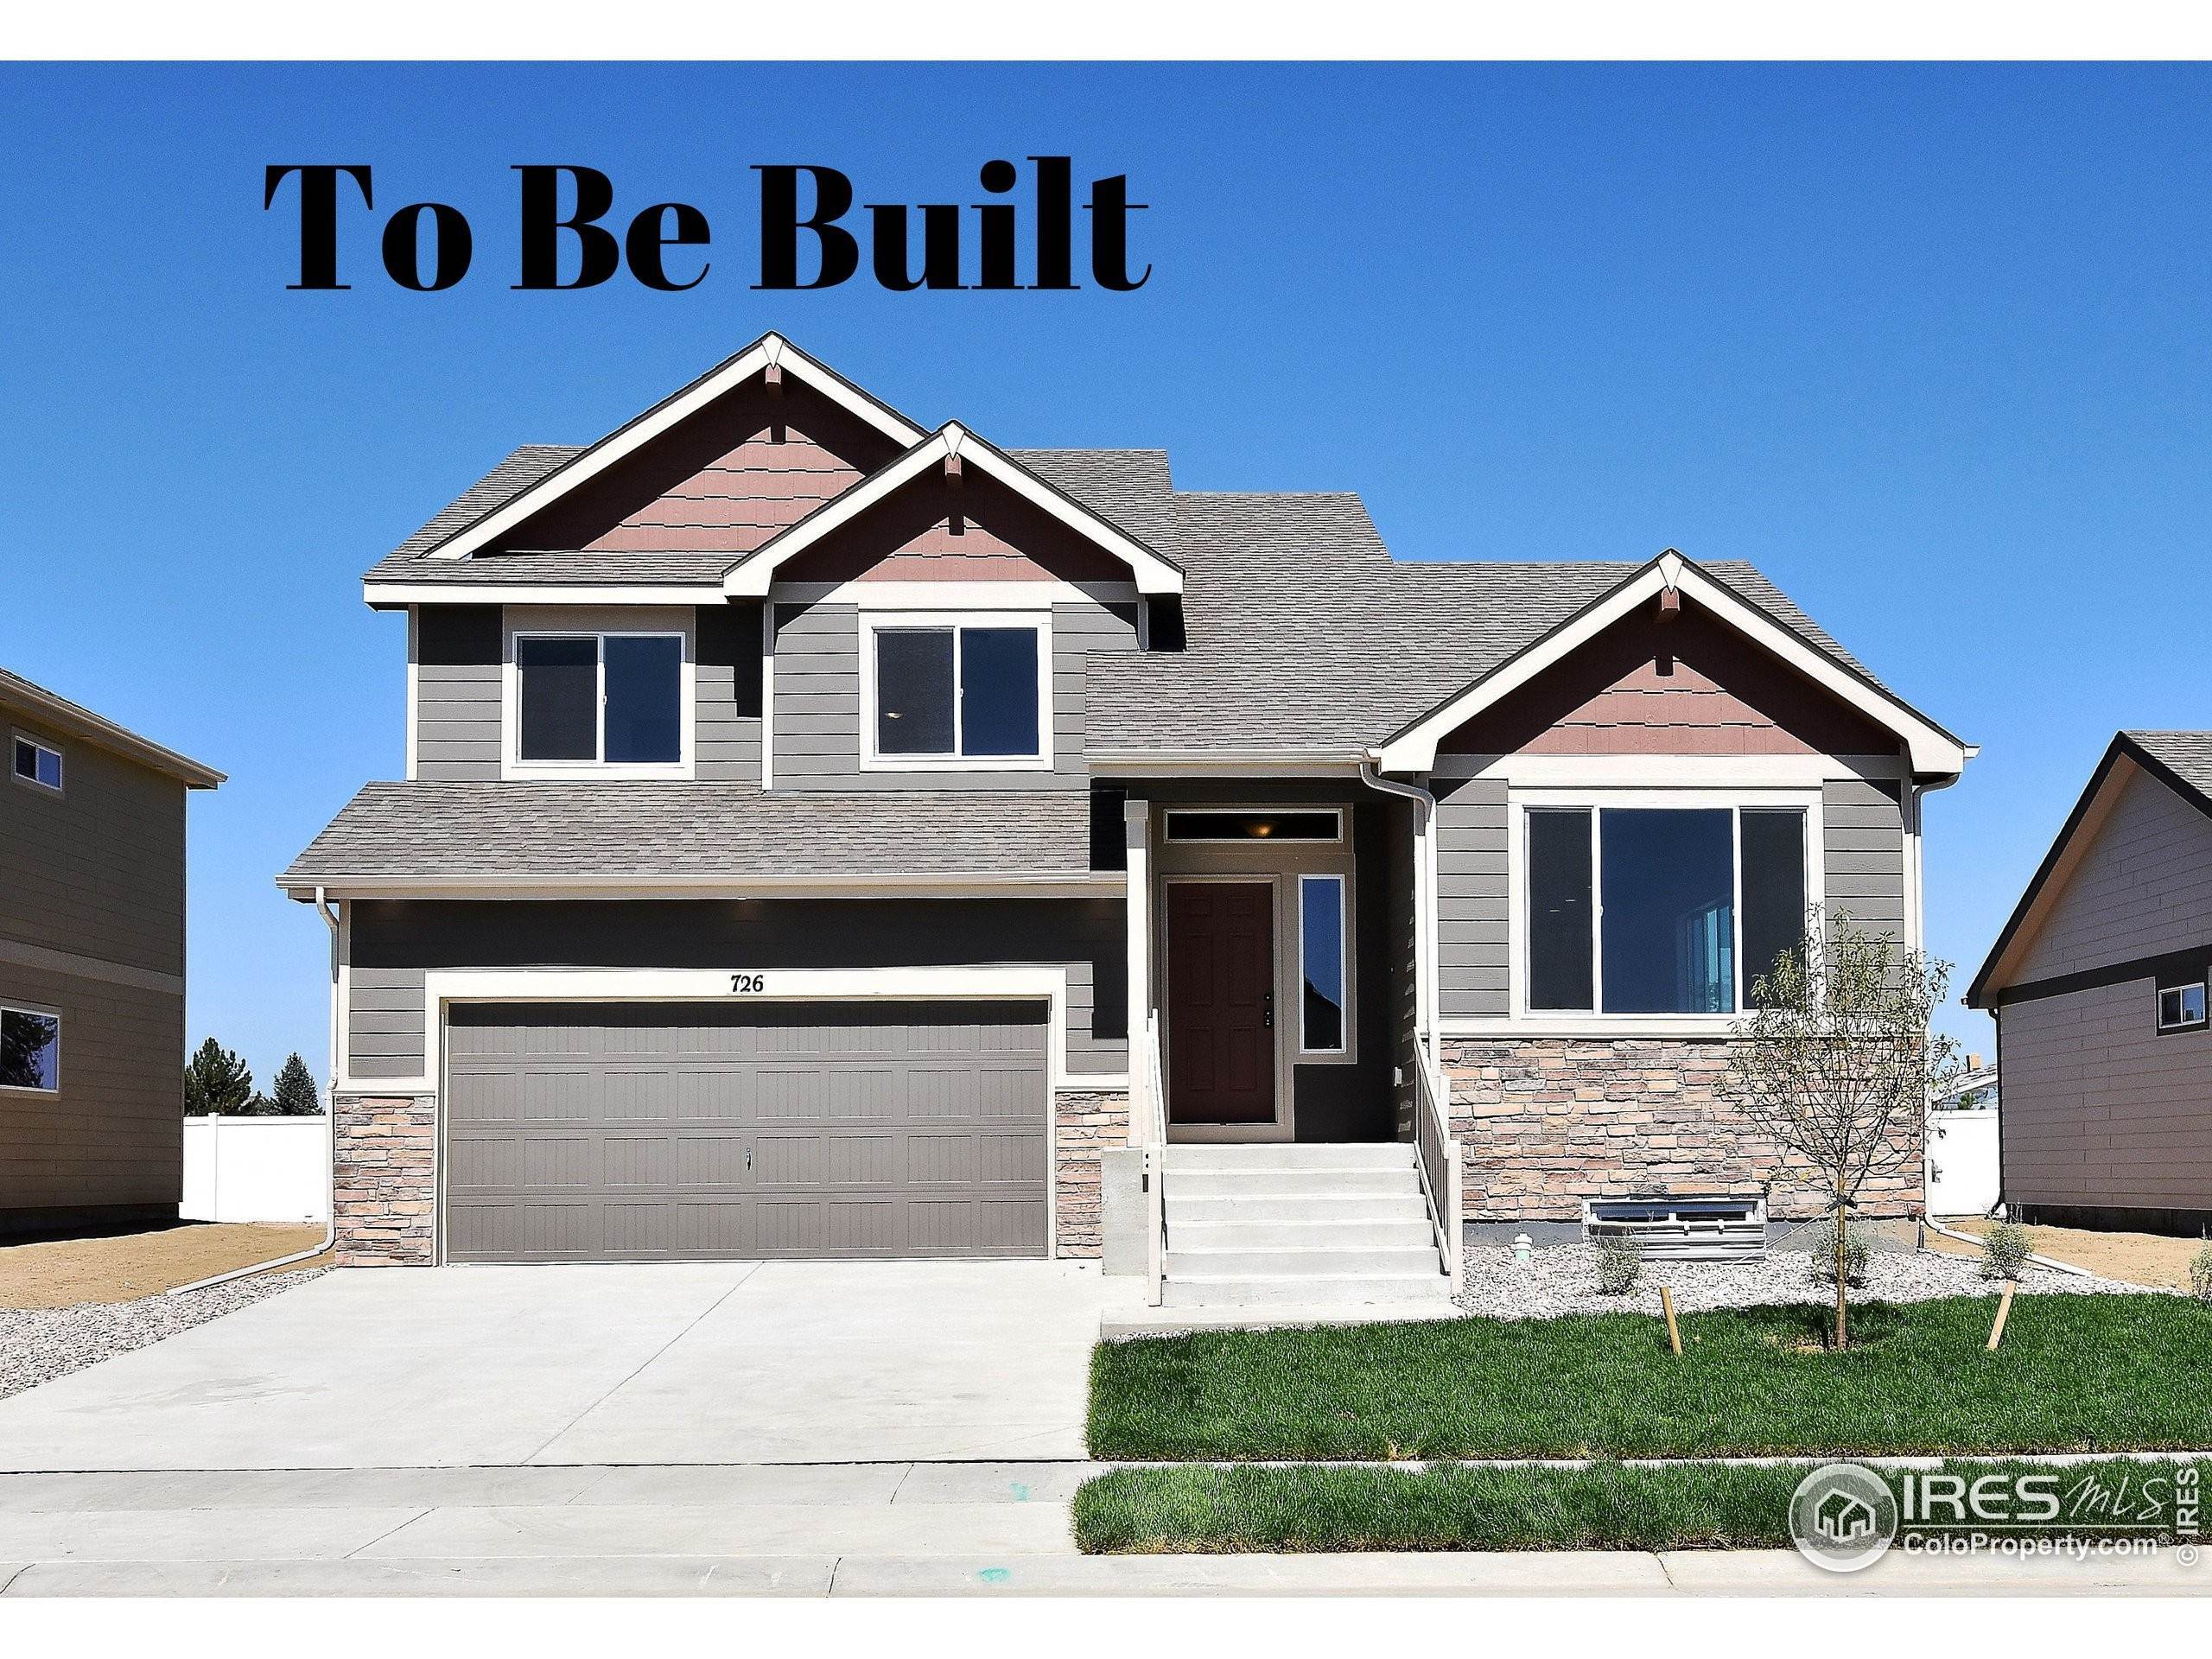 Single Family Homes for Active at 920 Maplebrook Drive Windsor, Colorado 80550 United States